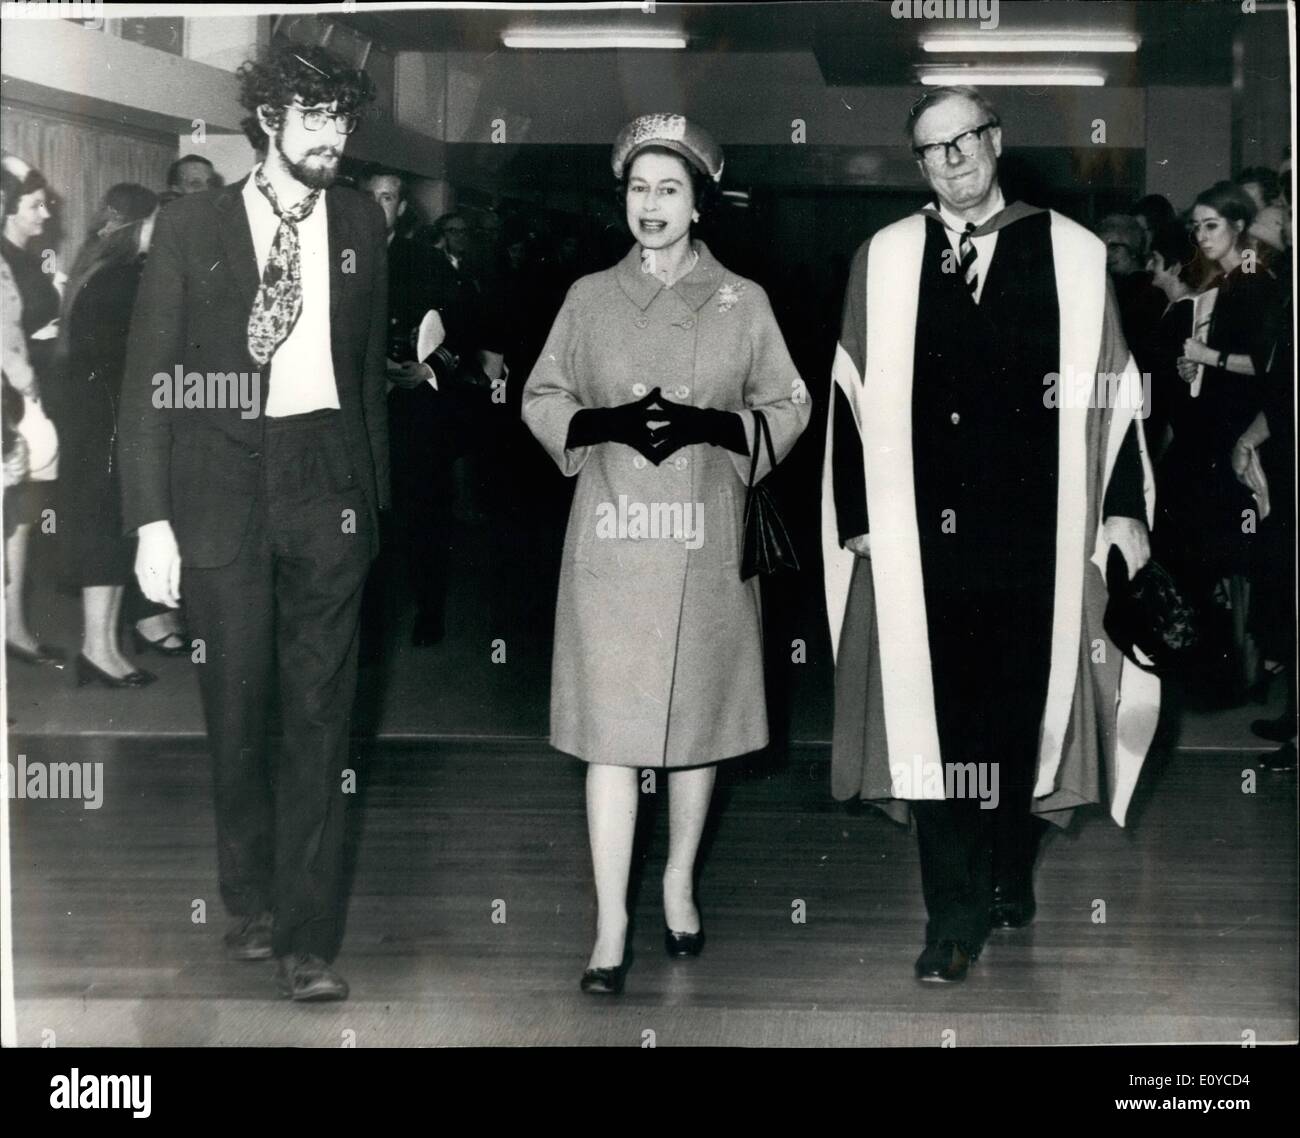 Nov. 11, 1969 - Queen and Duke of Edinburgh opened new college block and libraries of Imperial College of Science and Technology. H.M. The Queen visiting the students common room at the Imperial College of Science and Technology yesterday, with Lord Penny, director (on right) and Mr. P.R. Corbyn, President of the students union, who handed her a letter from the students asking he to consider changing the college charter and for her help on winning other reforms. Mr. Corbyn said the Queens told him she would reply to the letter Stock Photo